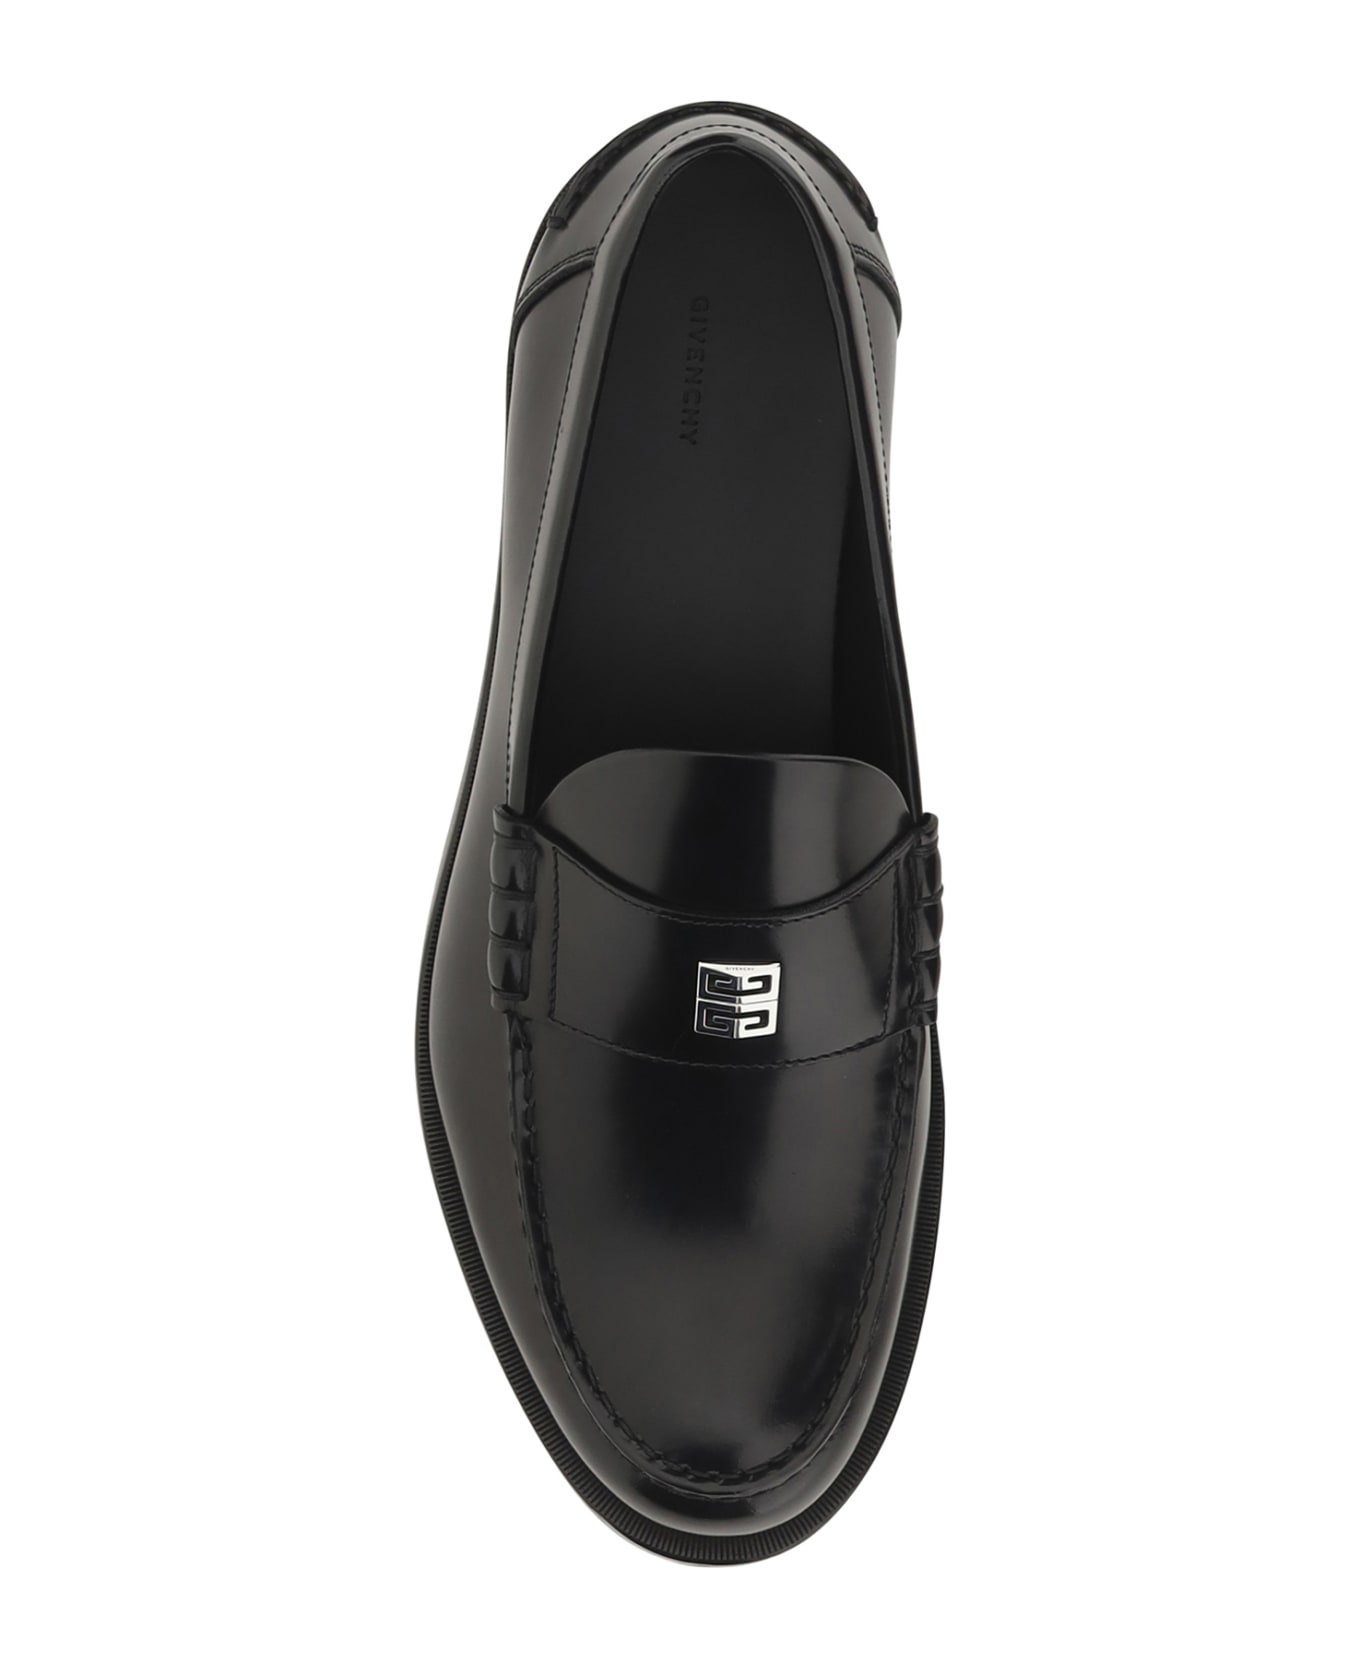 Givenchy Brushed Leather Loafers - Black ローファー＆デッキシューズ